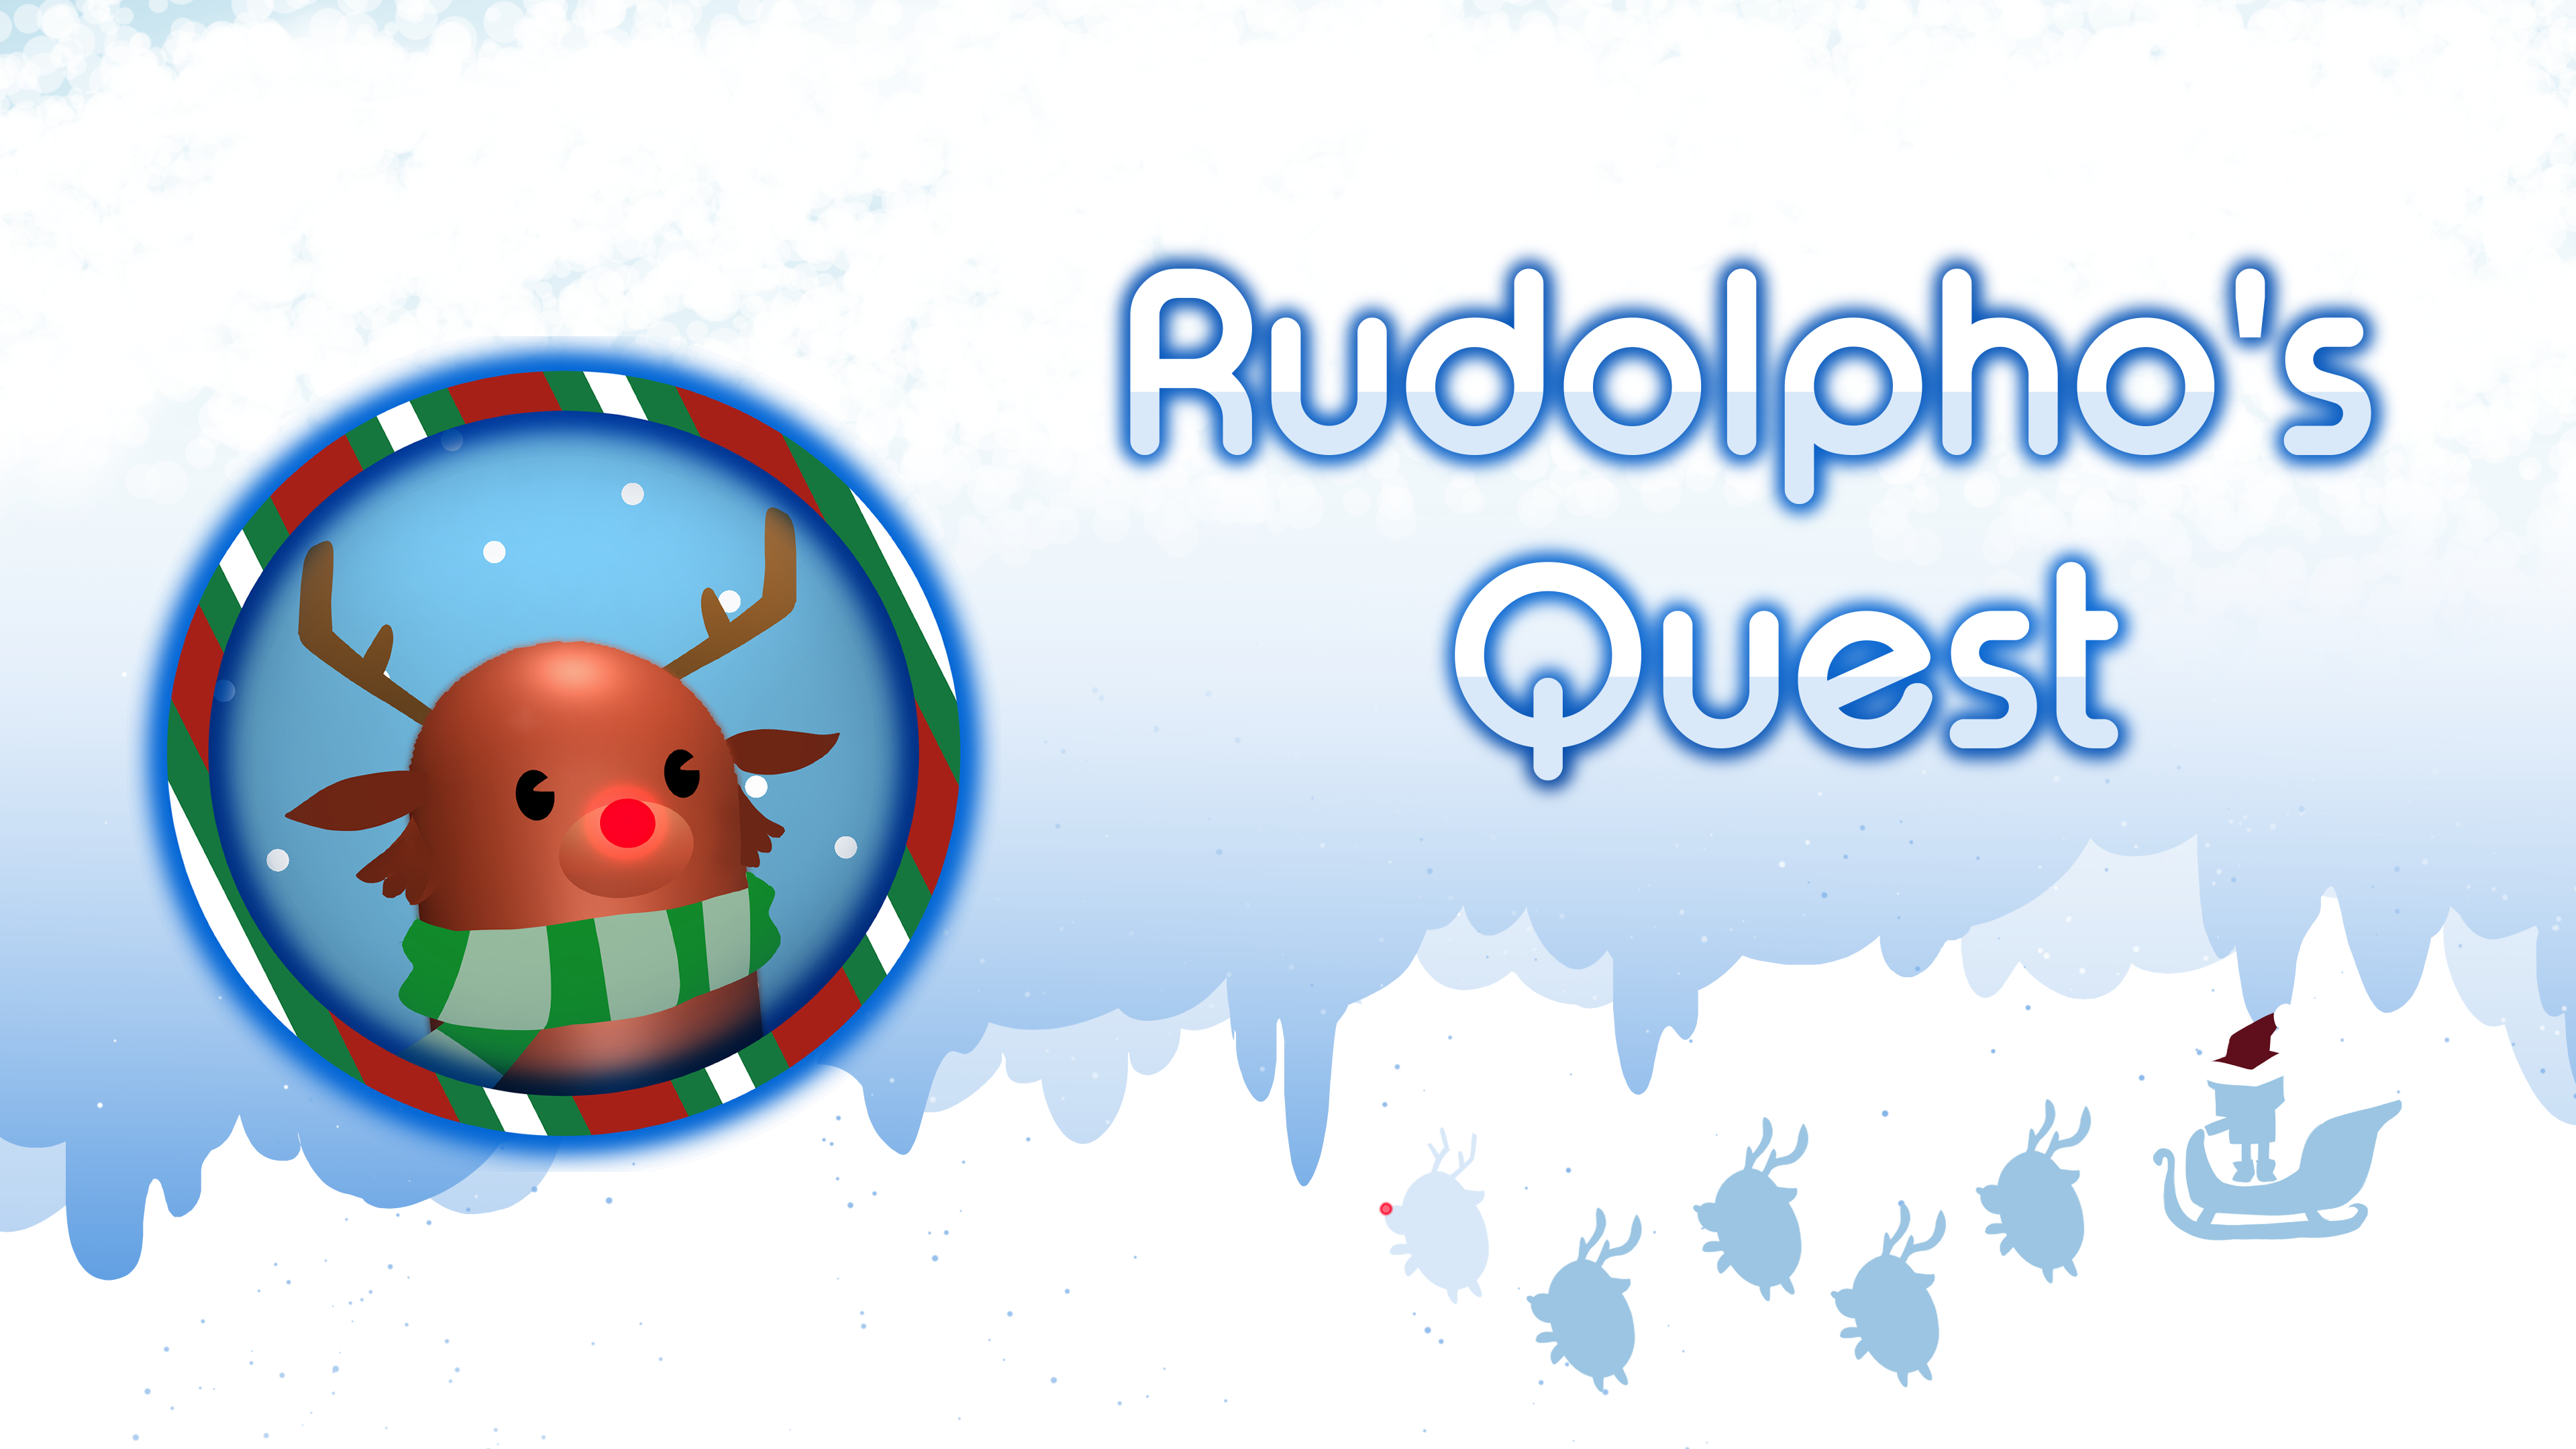 Rudolpho's Quest